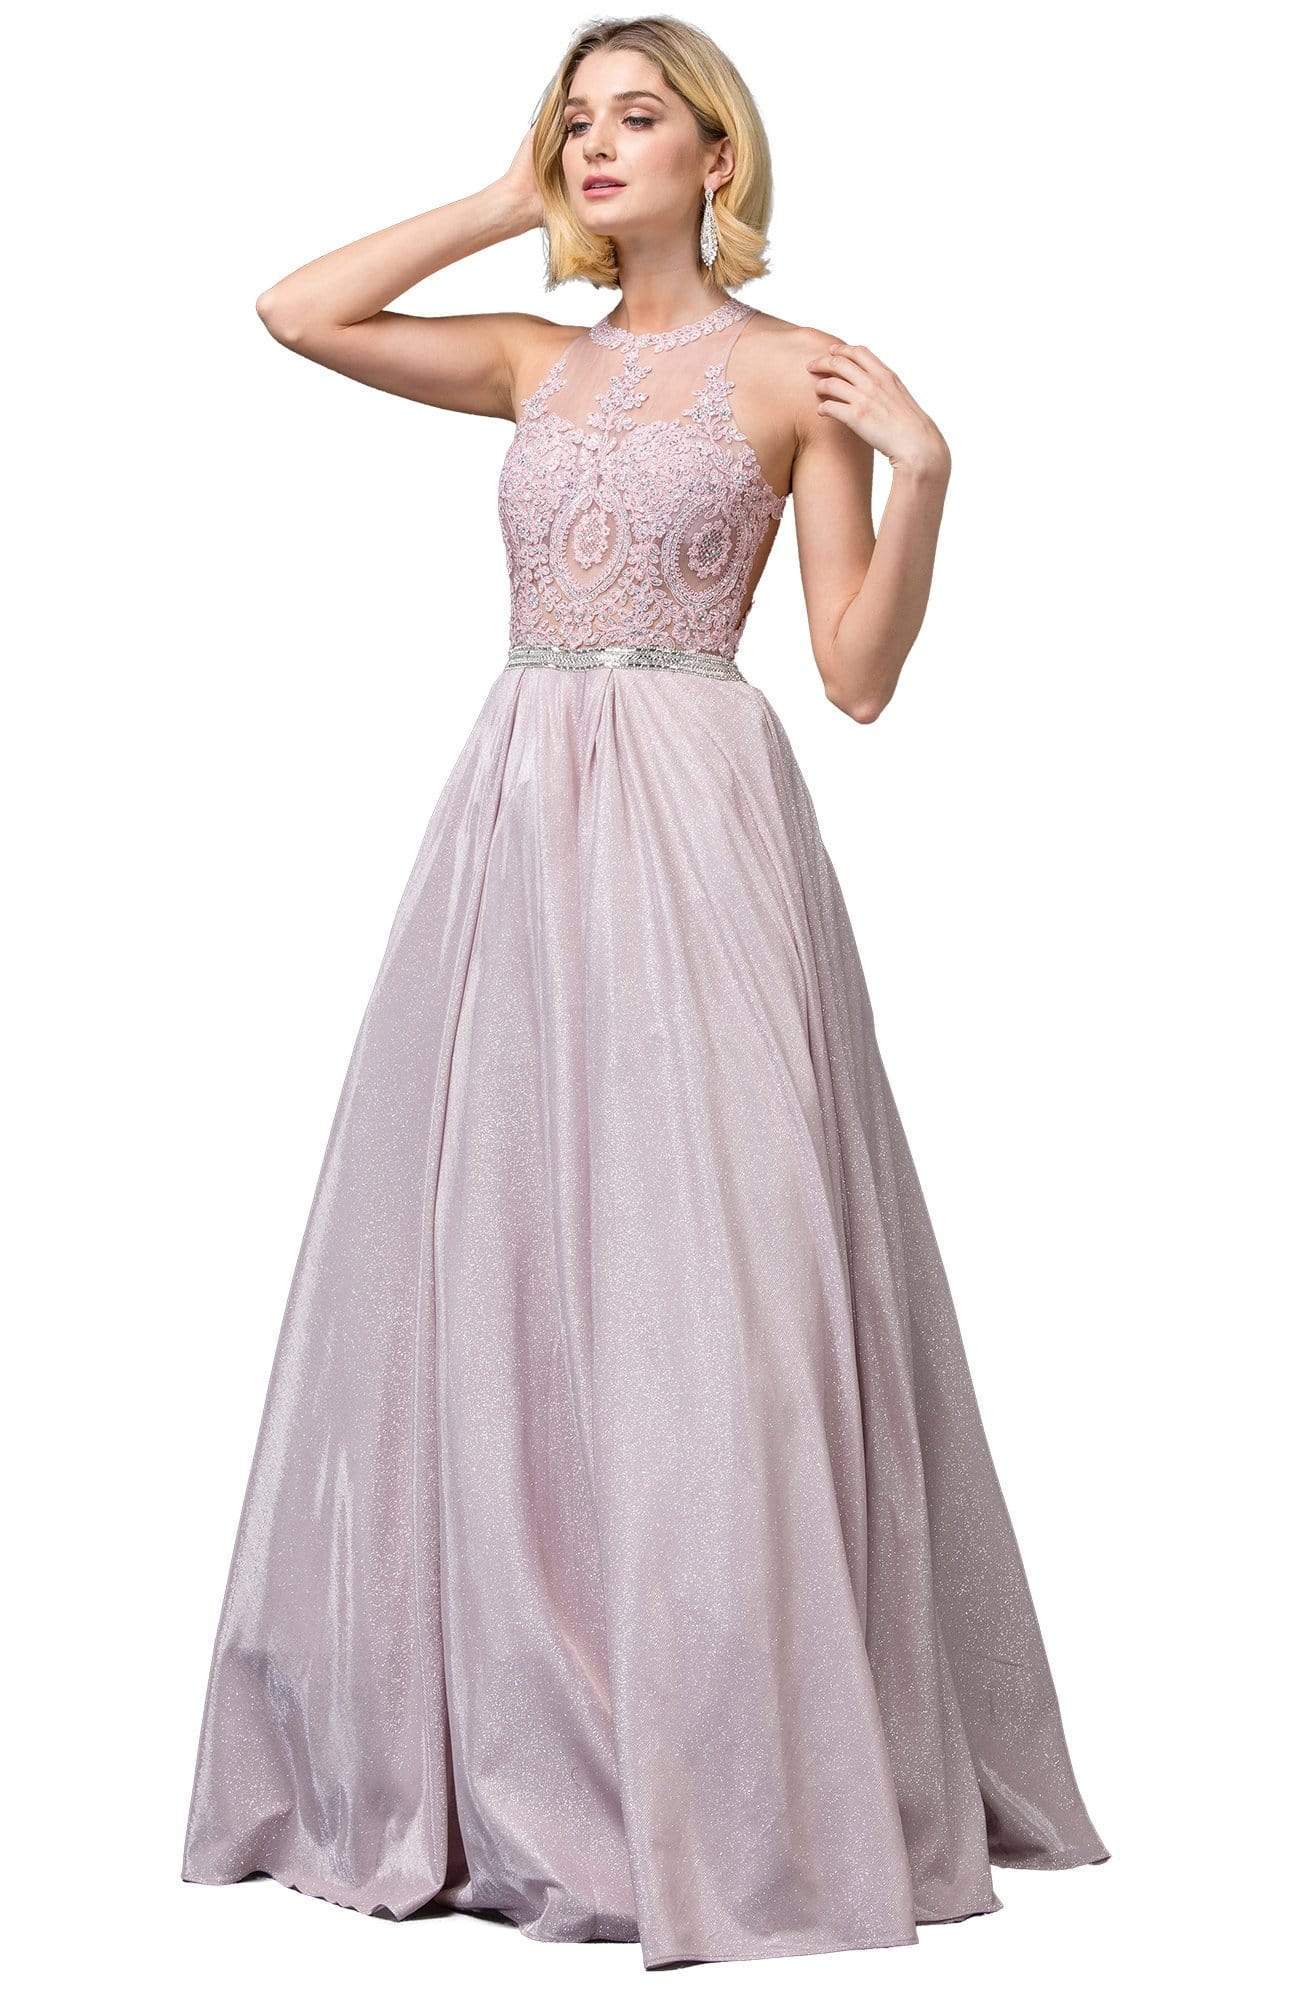 Image of Dancing Queen - 2829 Embroidered Halter Neck Ballgown